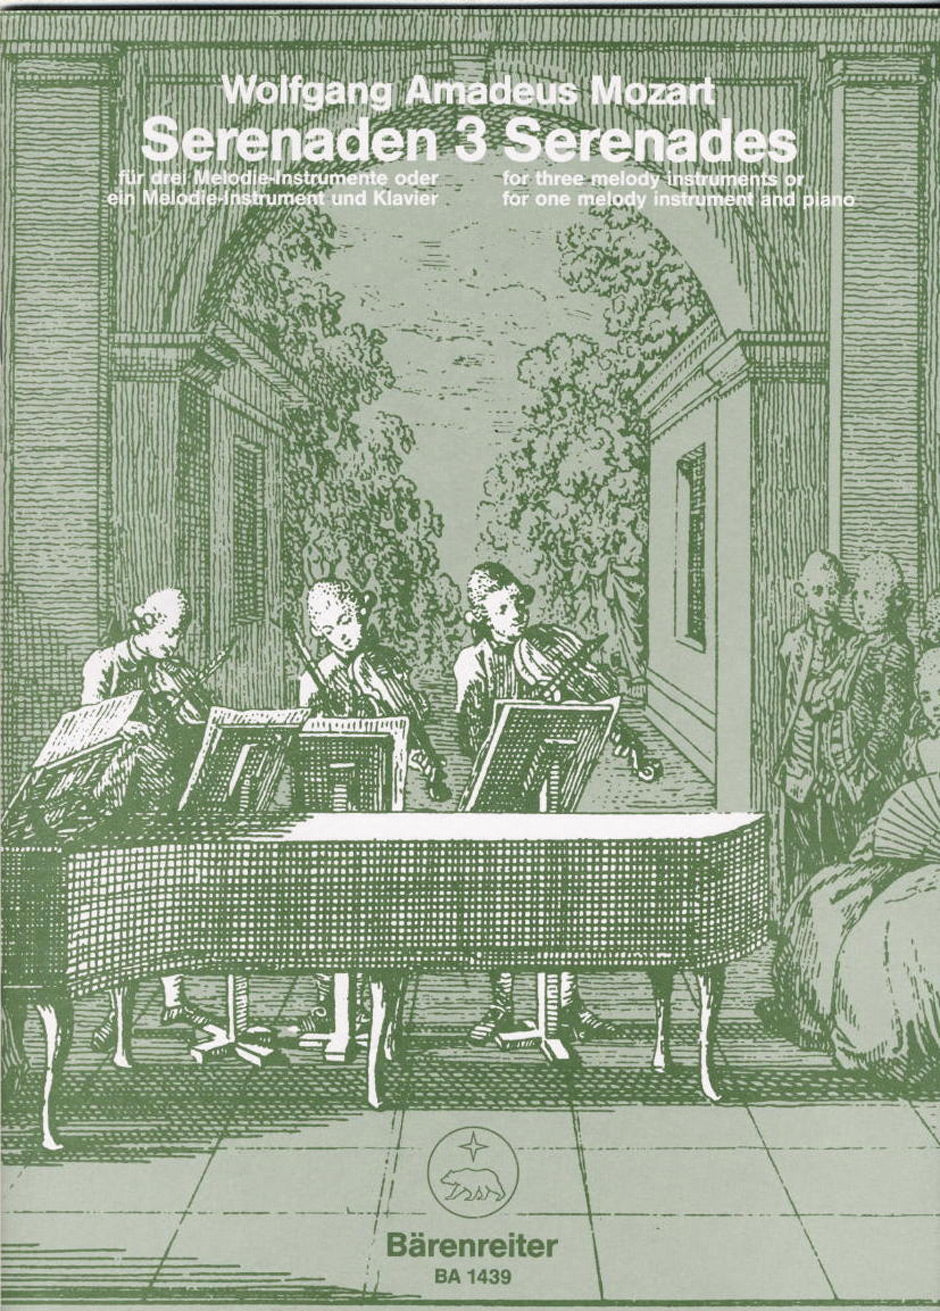 Mozart, Wolfgang Amadeus: Serenades for three melody instruments or for one melody instrument and piano